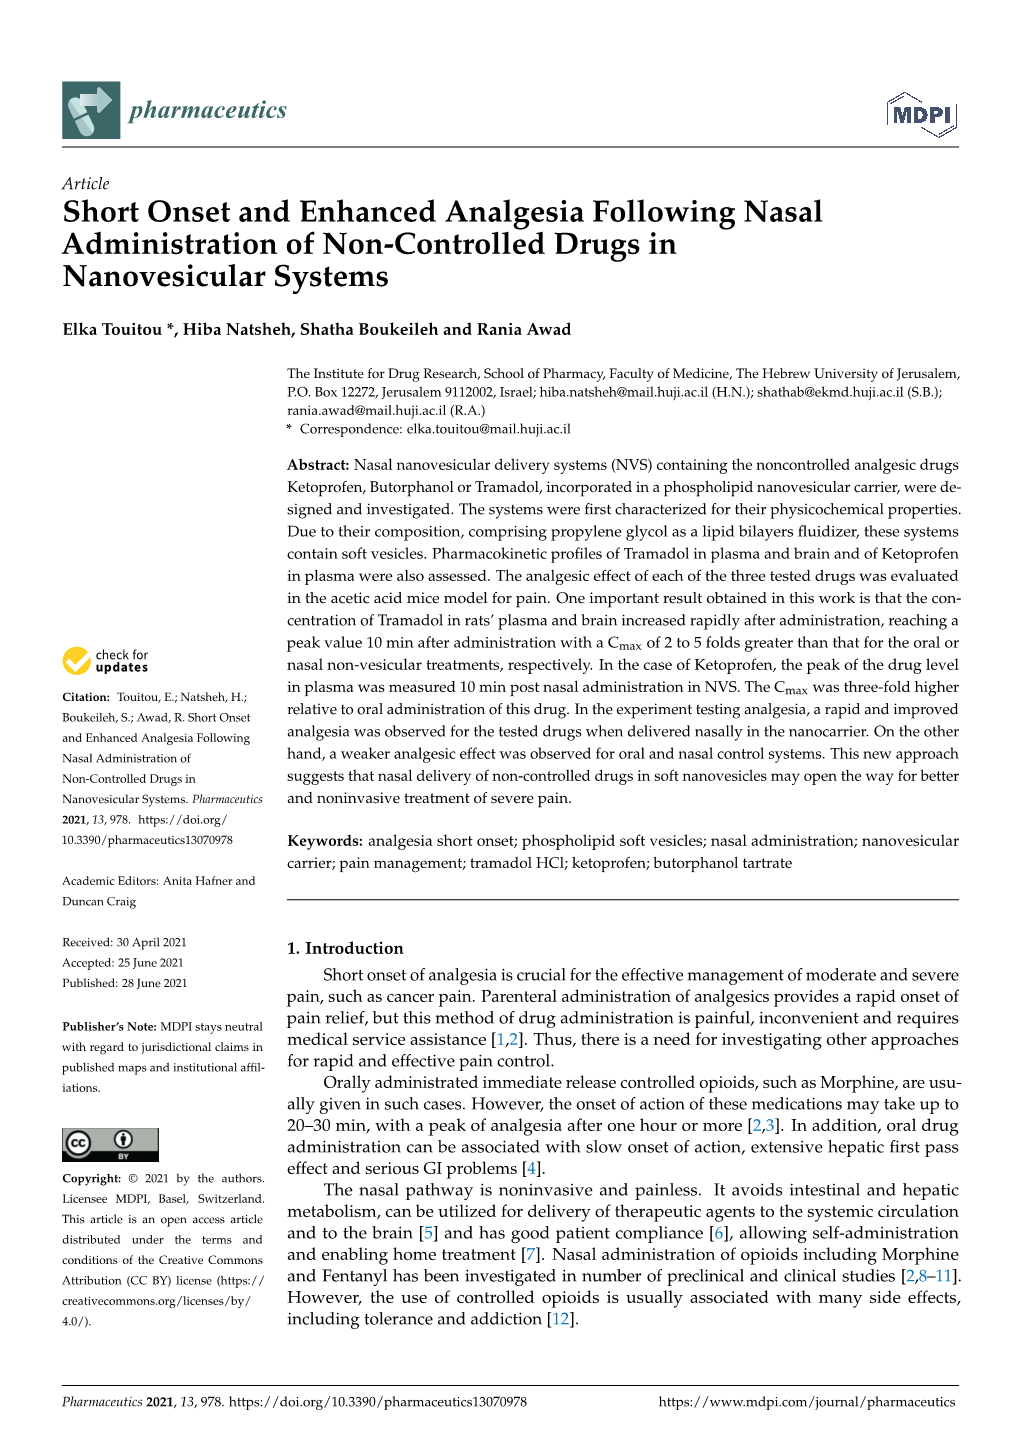 Short Onset and Enhanced Analgesia Following Nasal Administration of Non-Controlled Drugs in Nanovesicular Systems